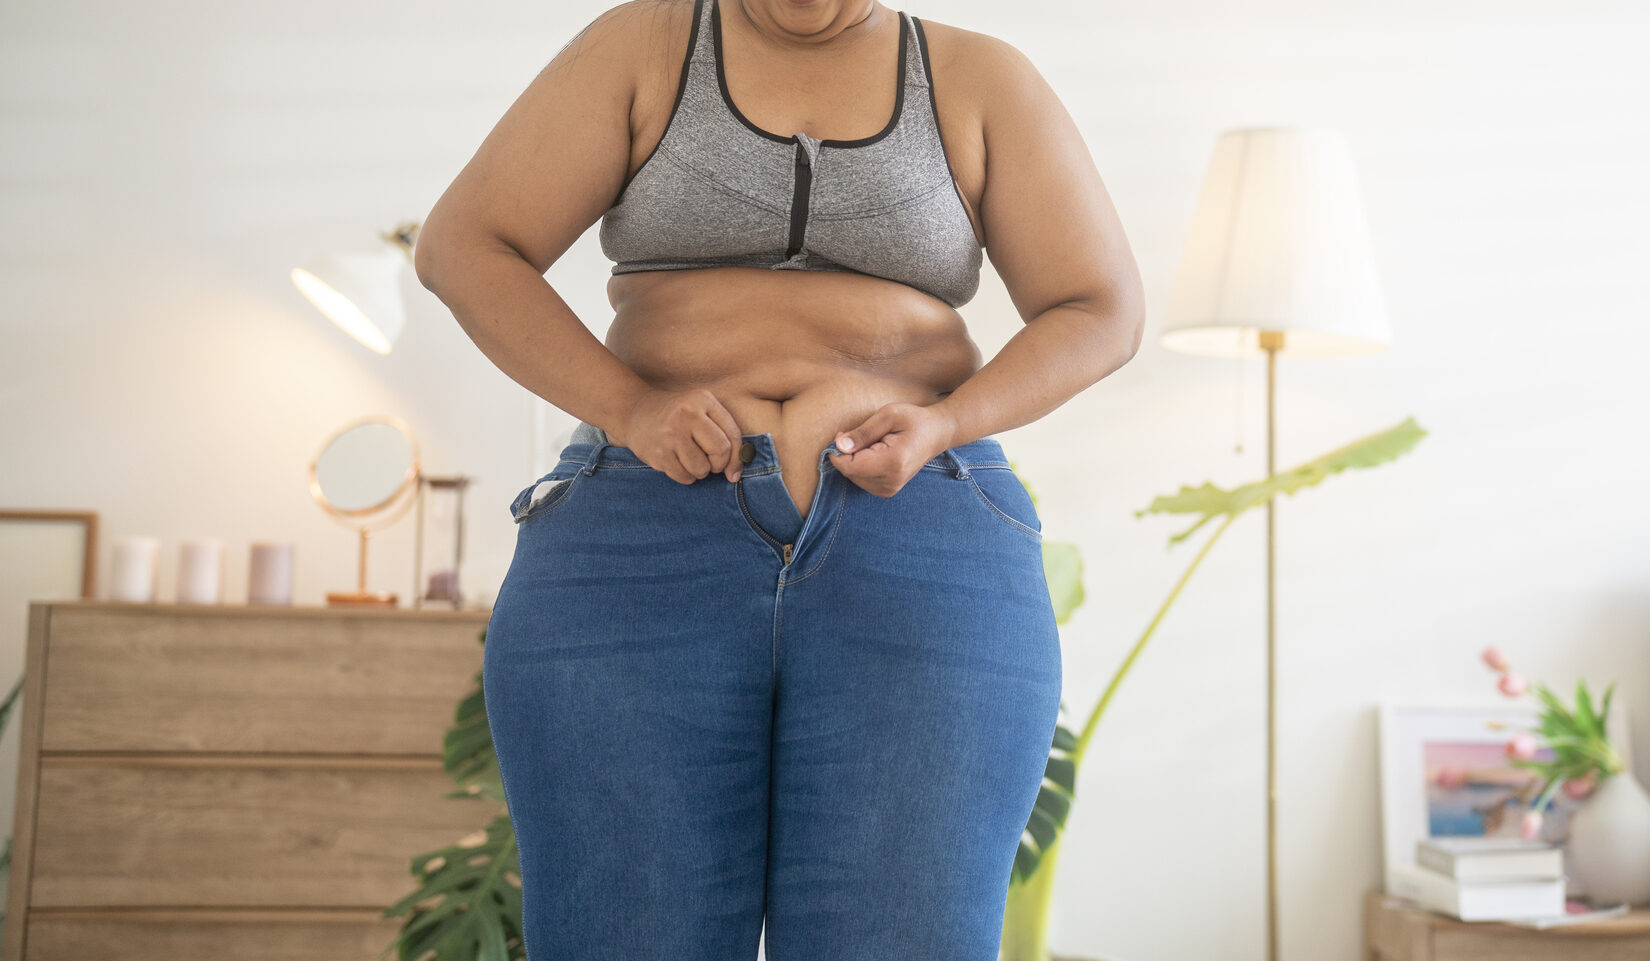 What is FUPA? Everything about FUPA and How to get rid of it?